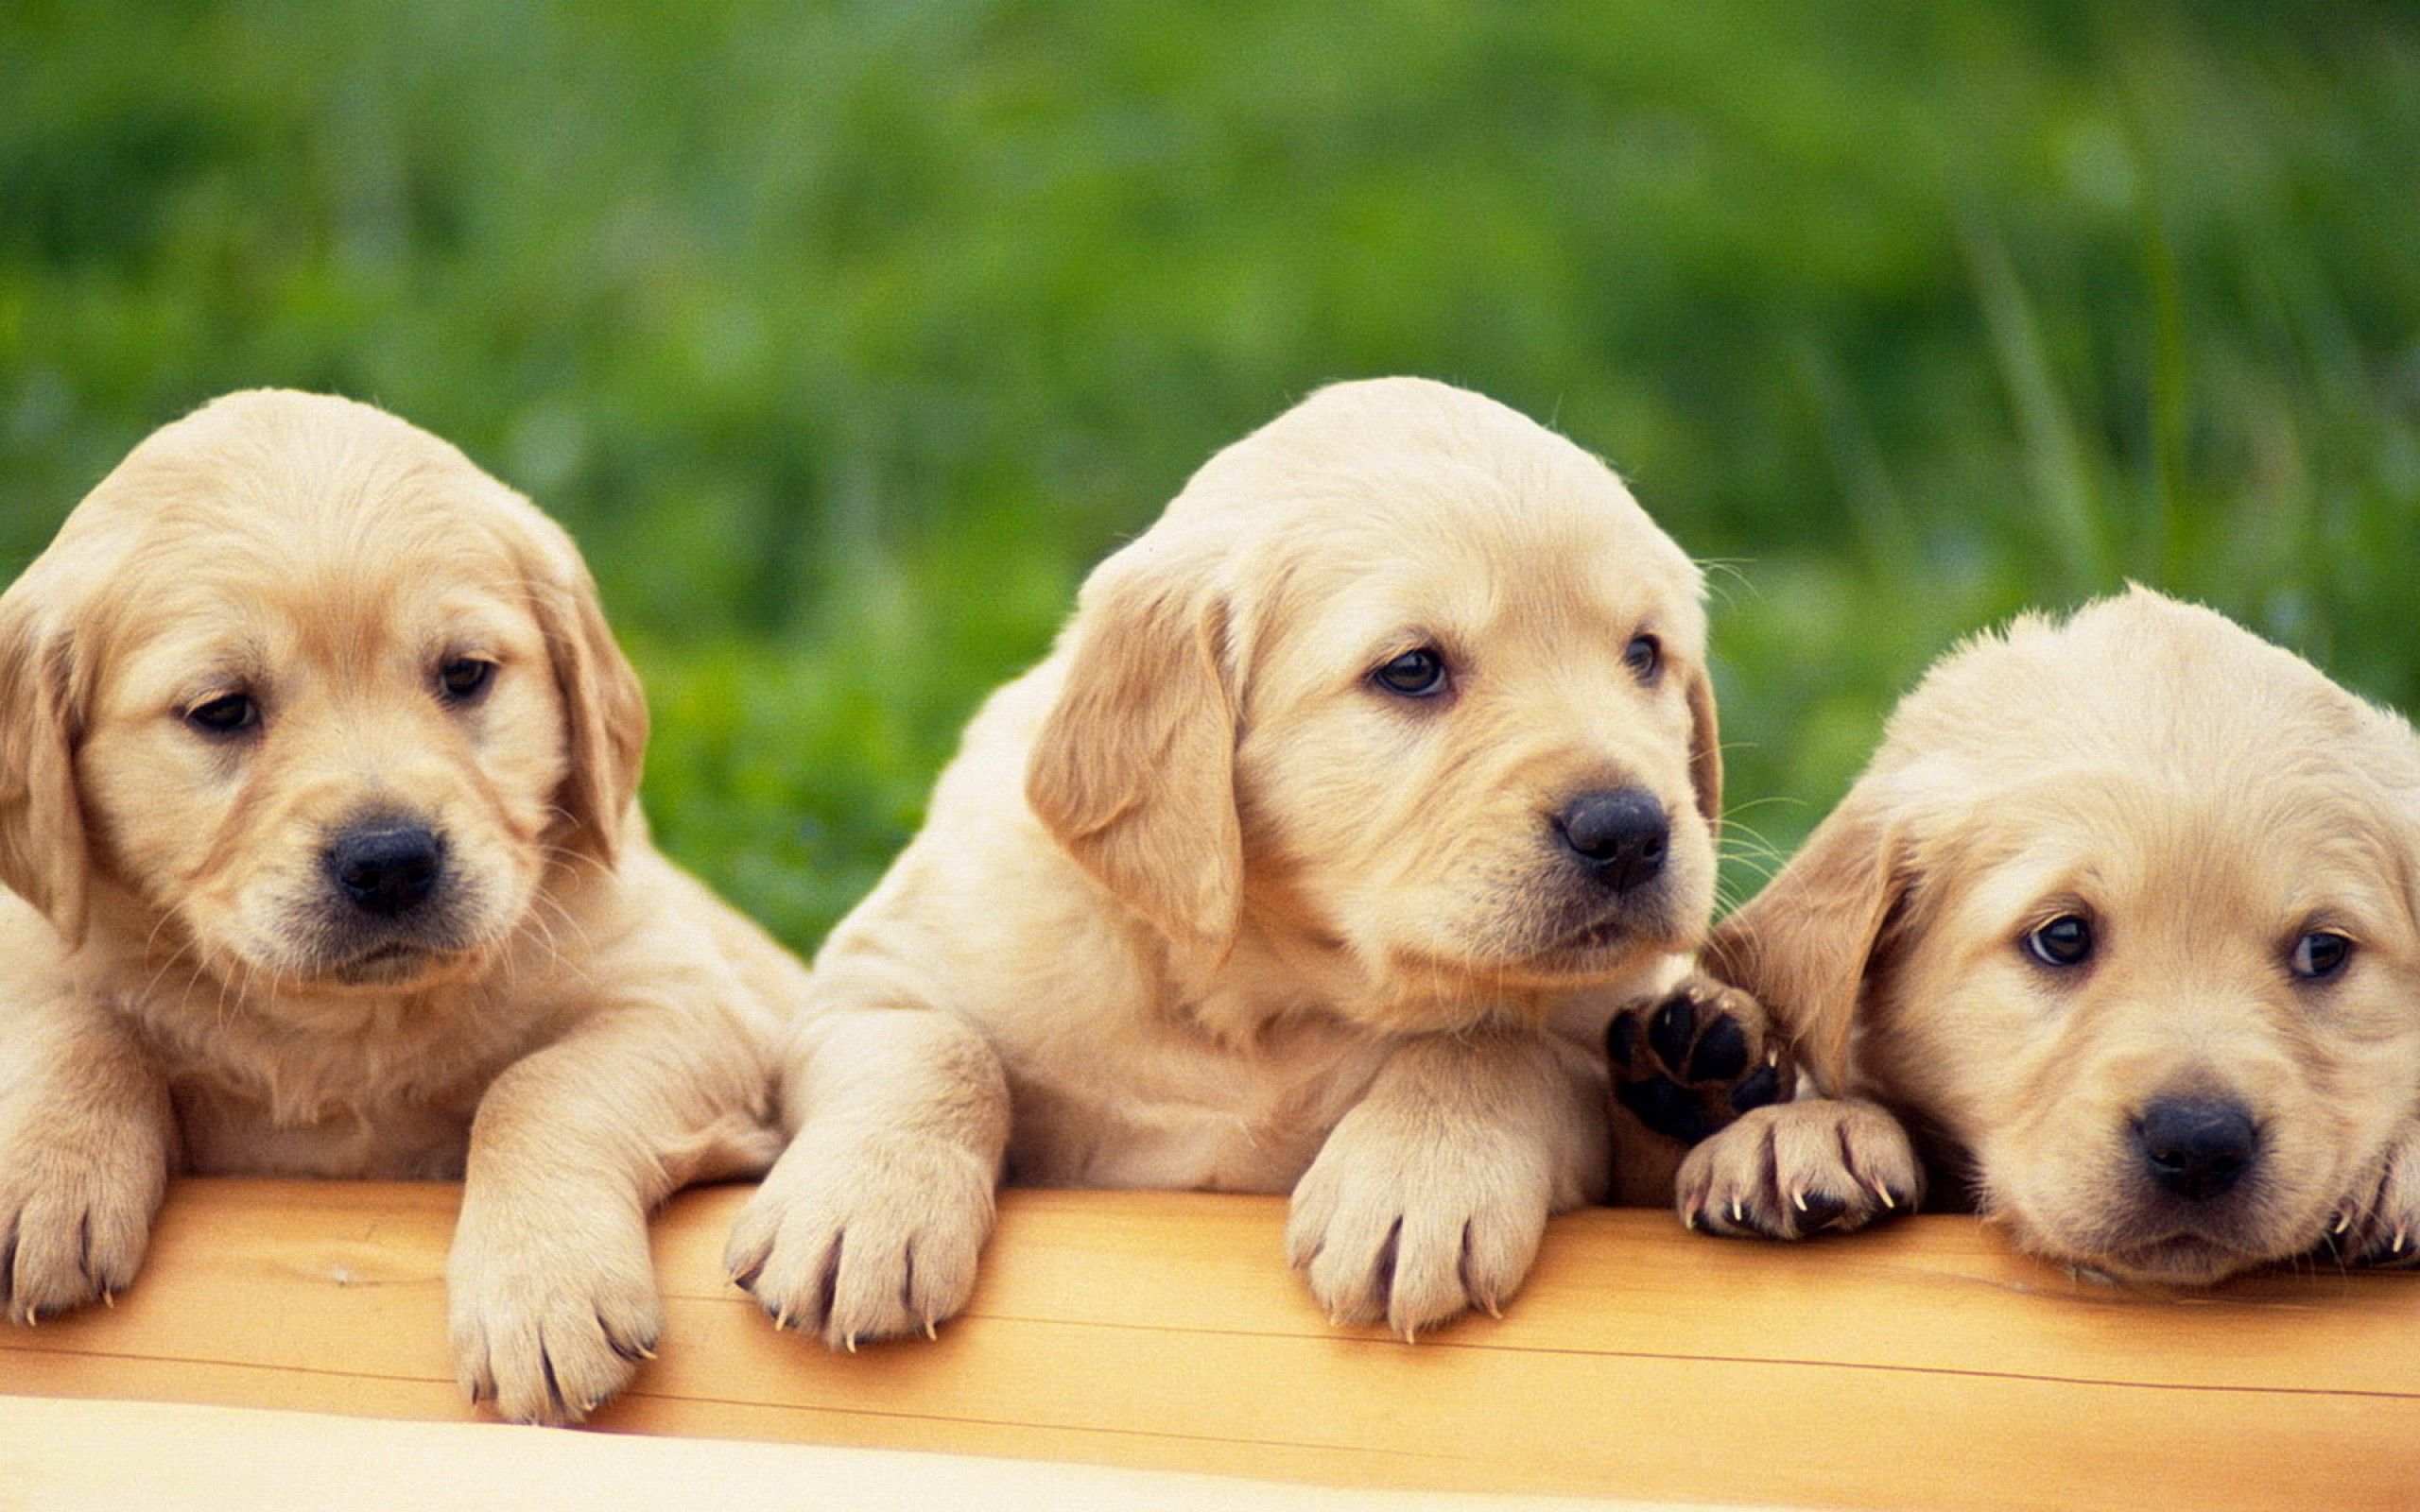 And Click At Link To Download Wallpaper Labrador Puppies For Free ...